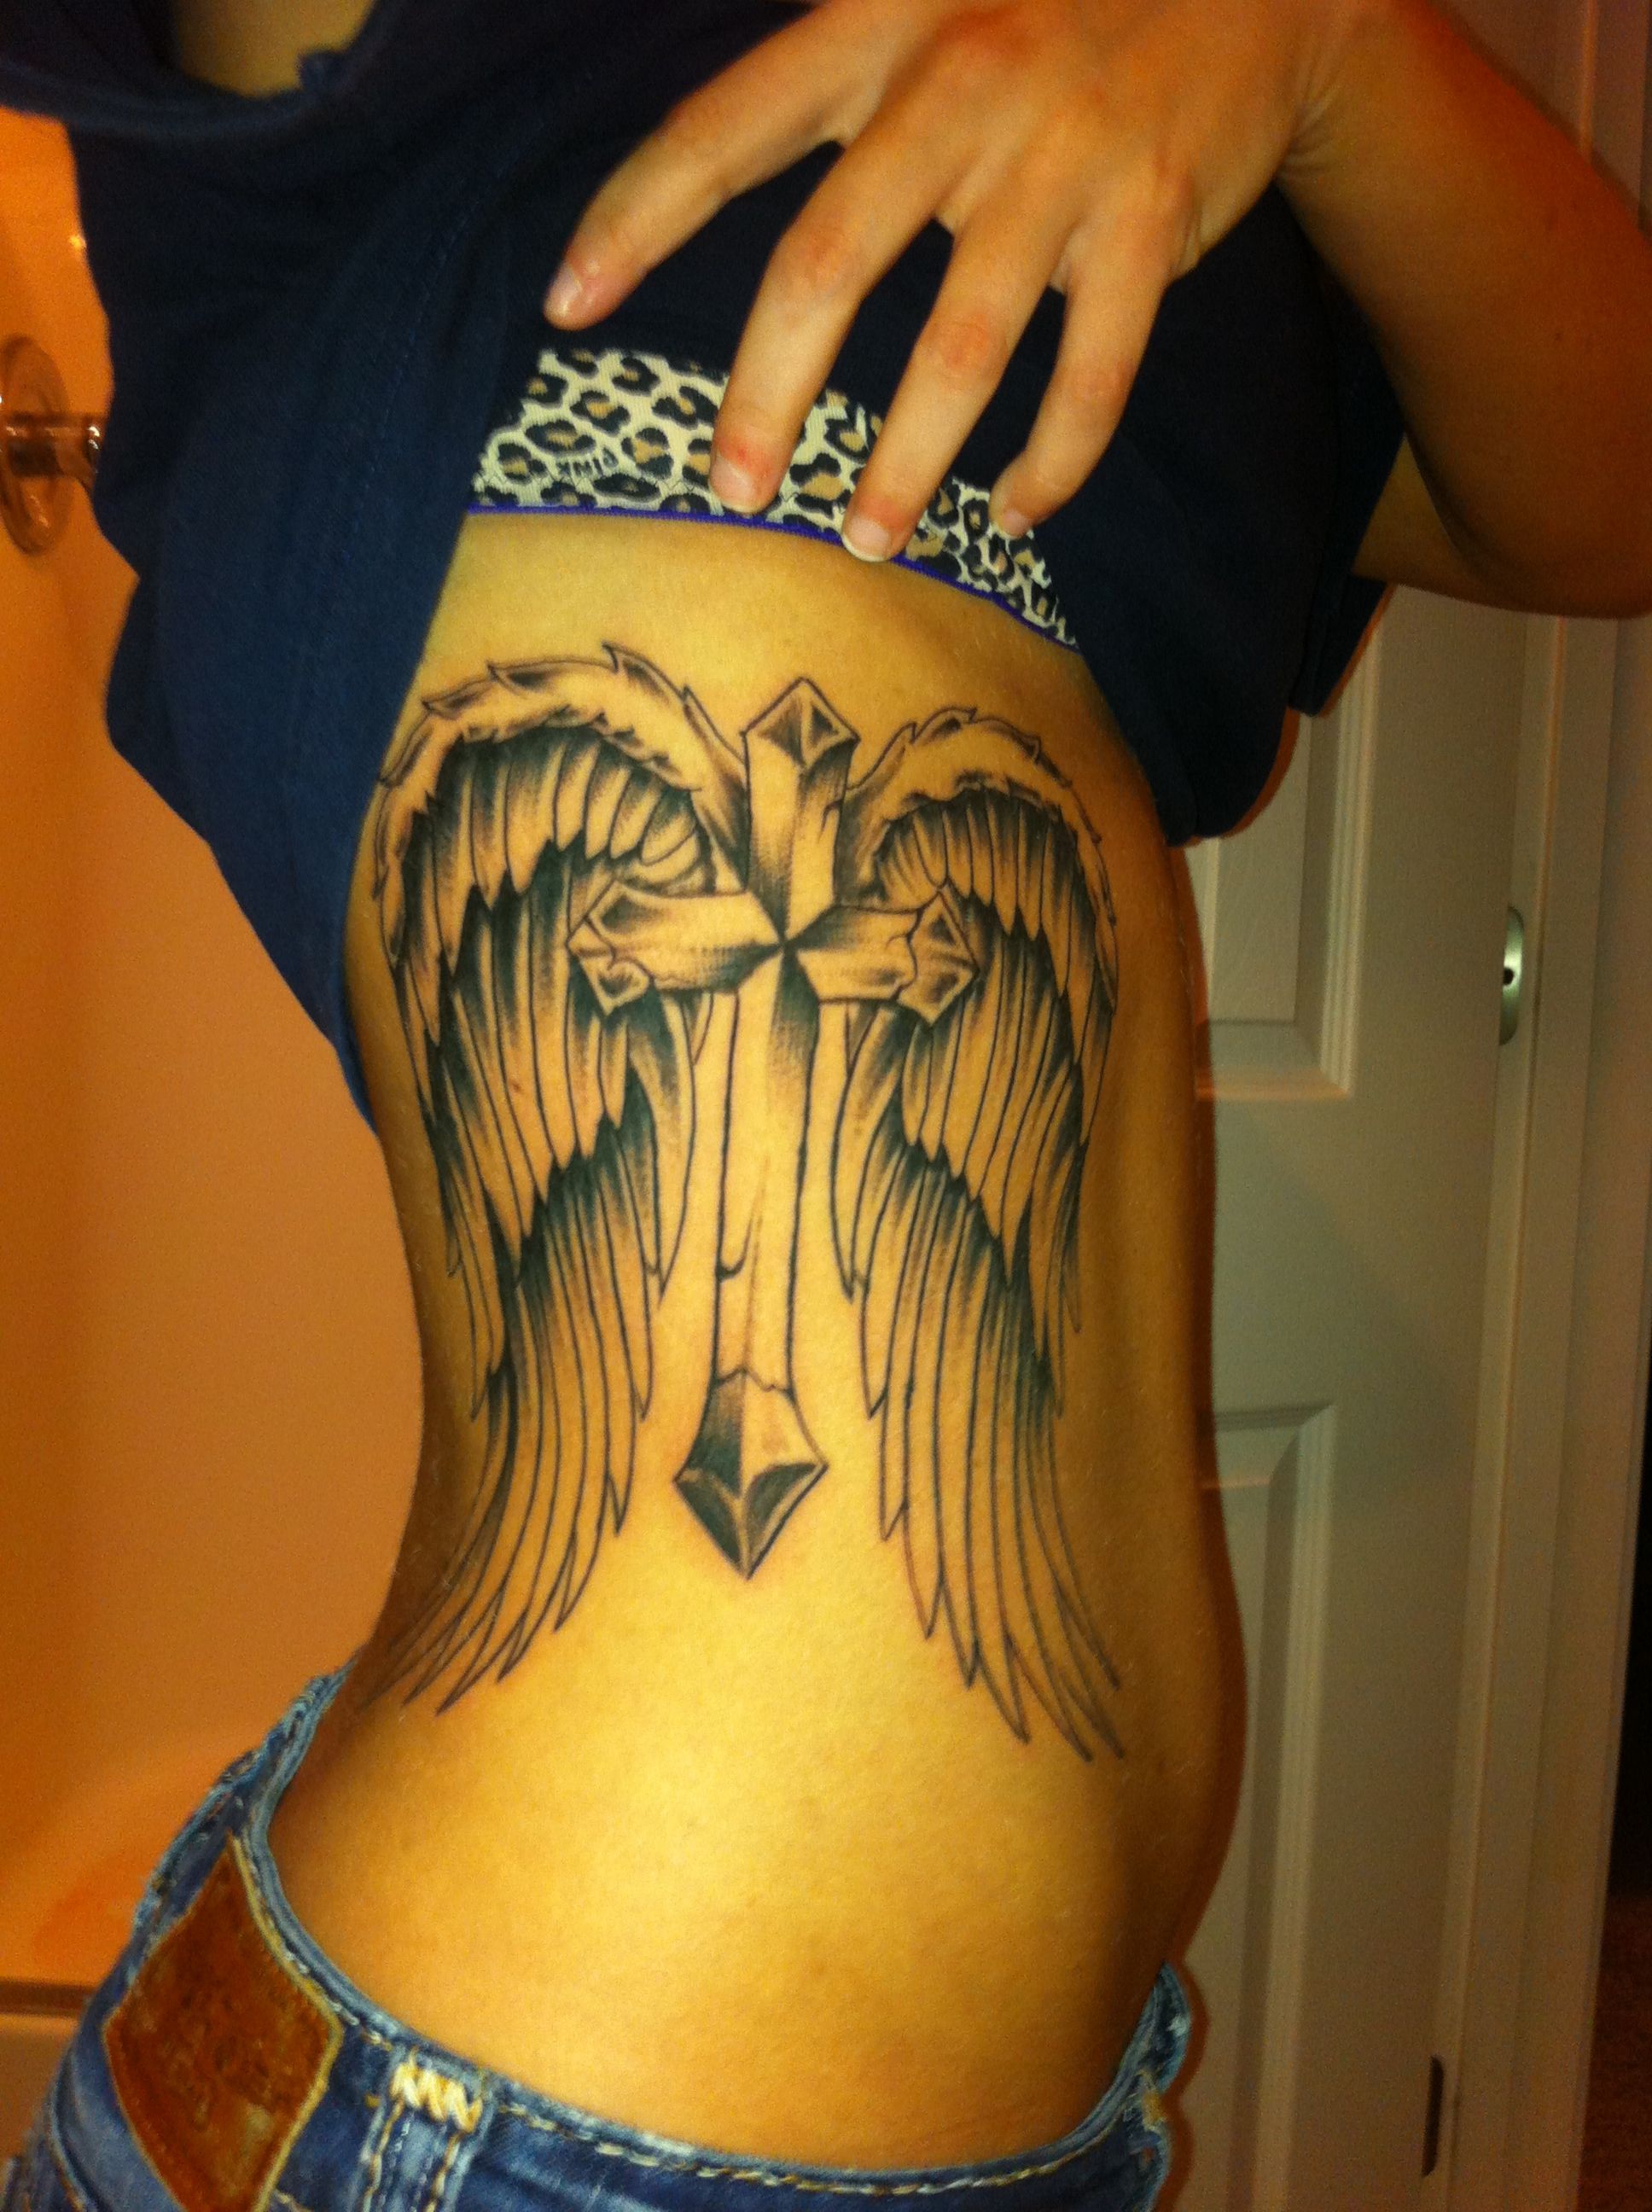 Cross Tattoo With Wings